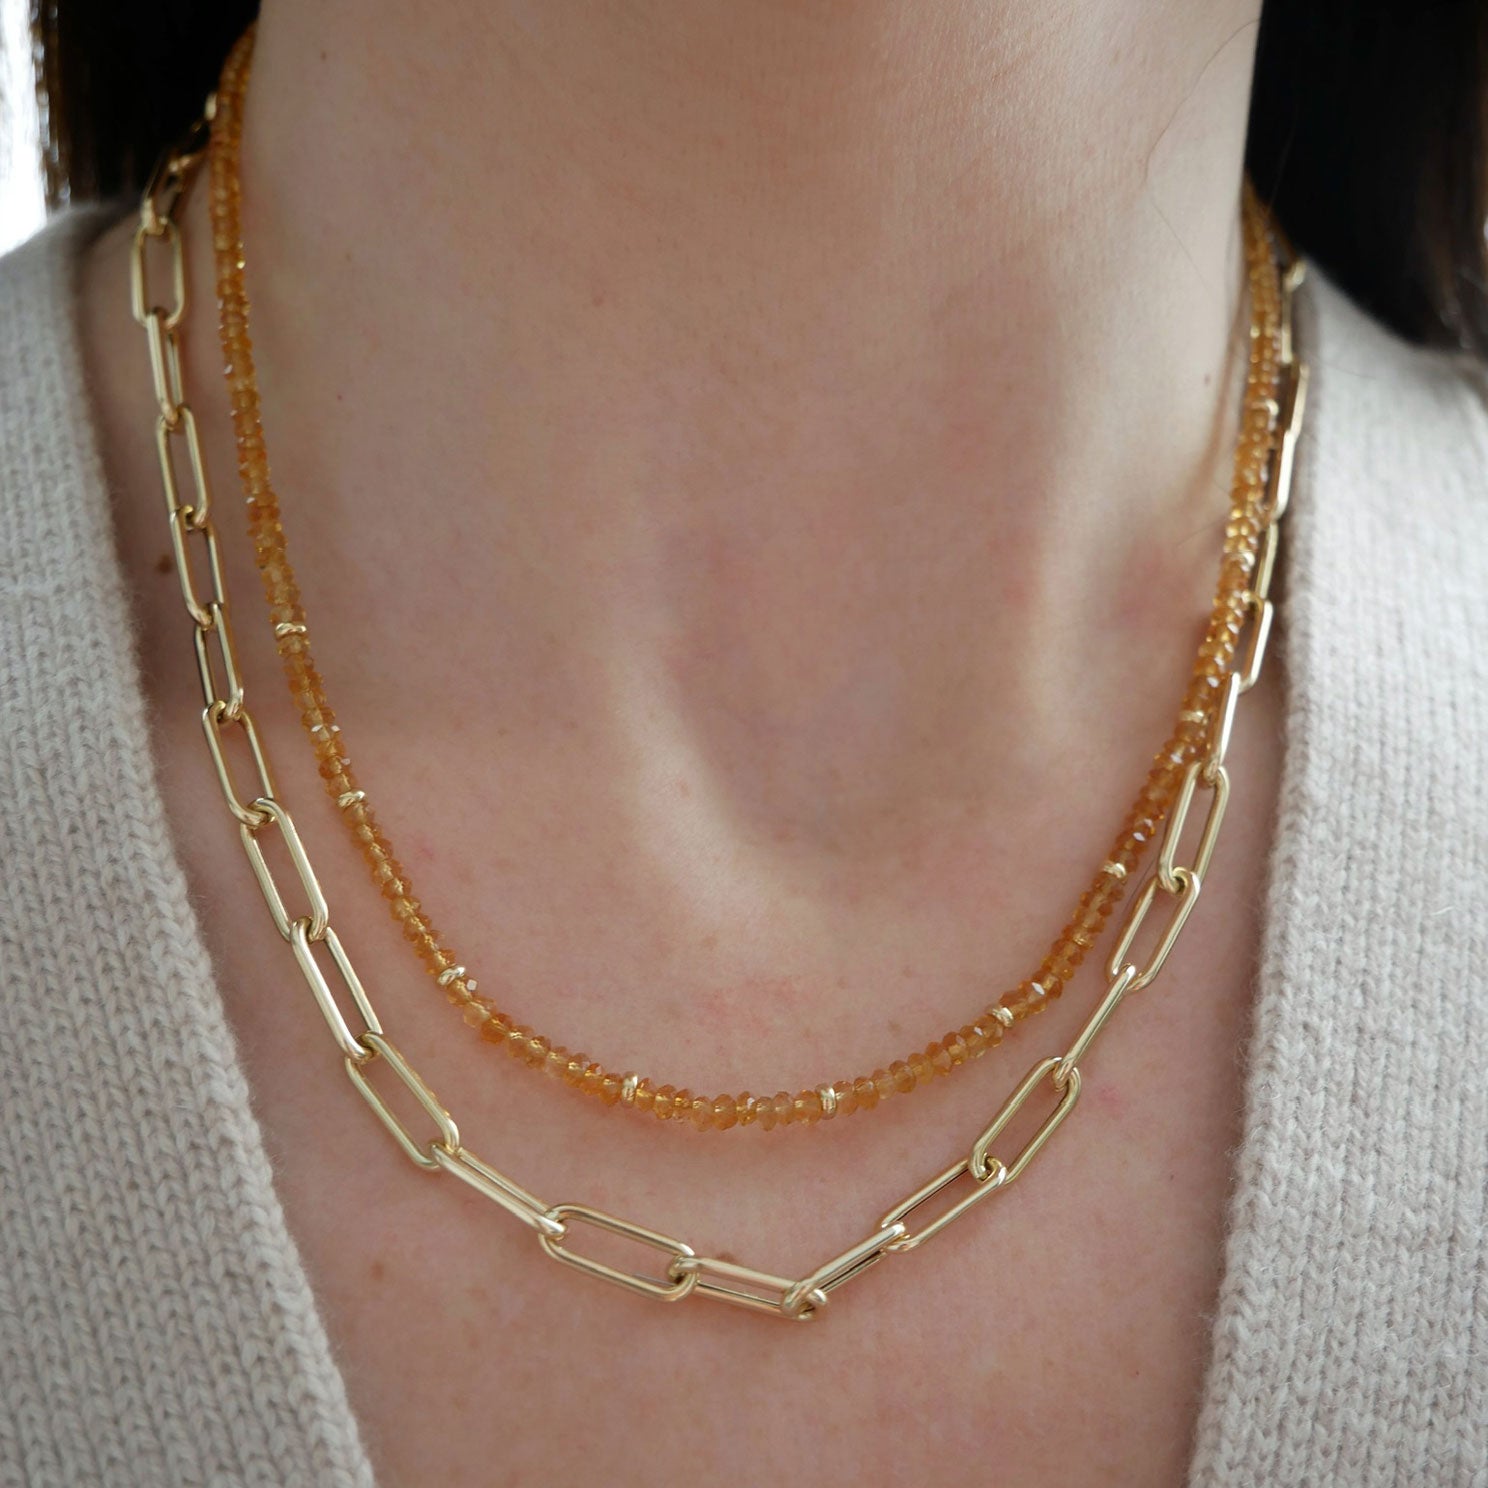 Birthstone Bead Necklace In Citrine styled on neck of model with jumbo lola chain gold necklace and wearing sweater